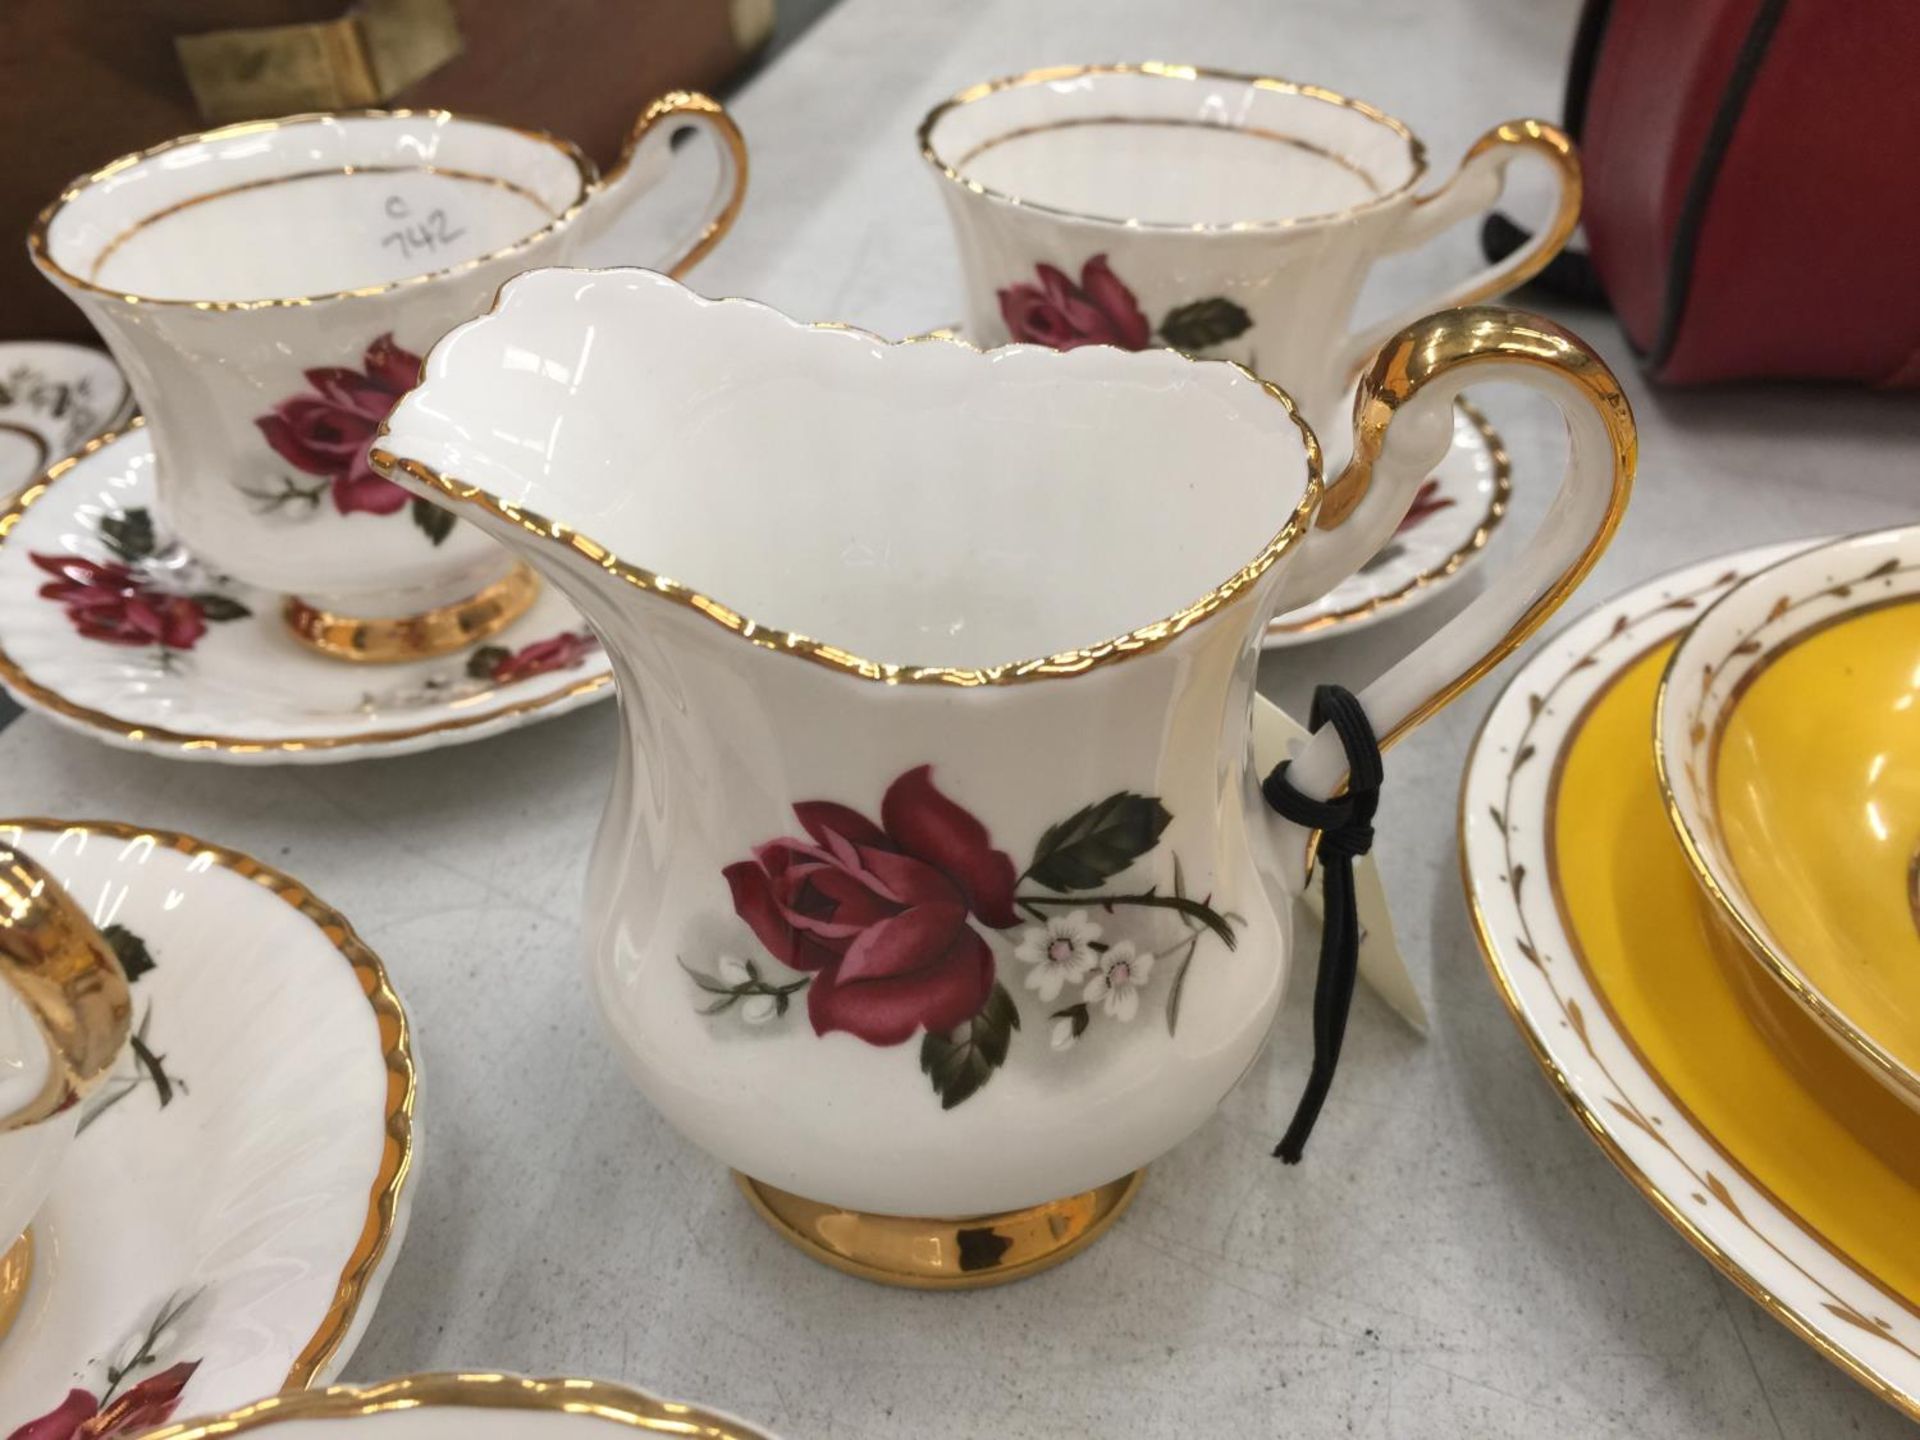 A VINTAGE ROSE PATTERNED 'LUBORN' TEASET TO INCLUDE CUPS, SAUCERS, CREAM JUG AND SUGAR BOWL - Image 5 of 6